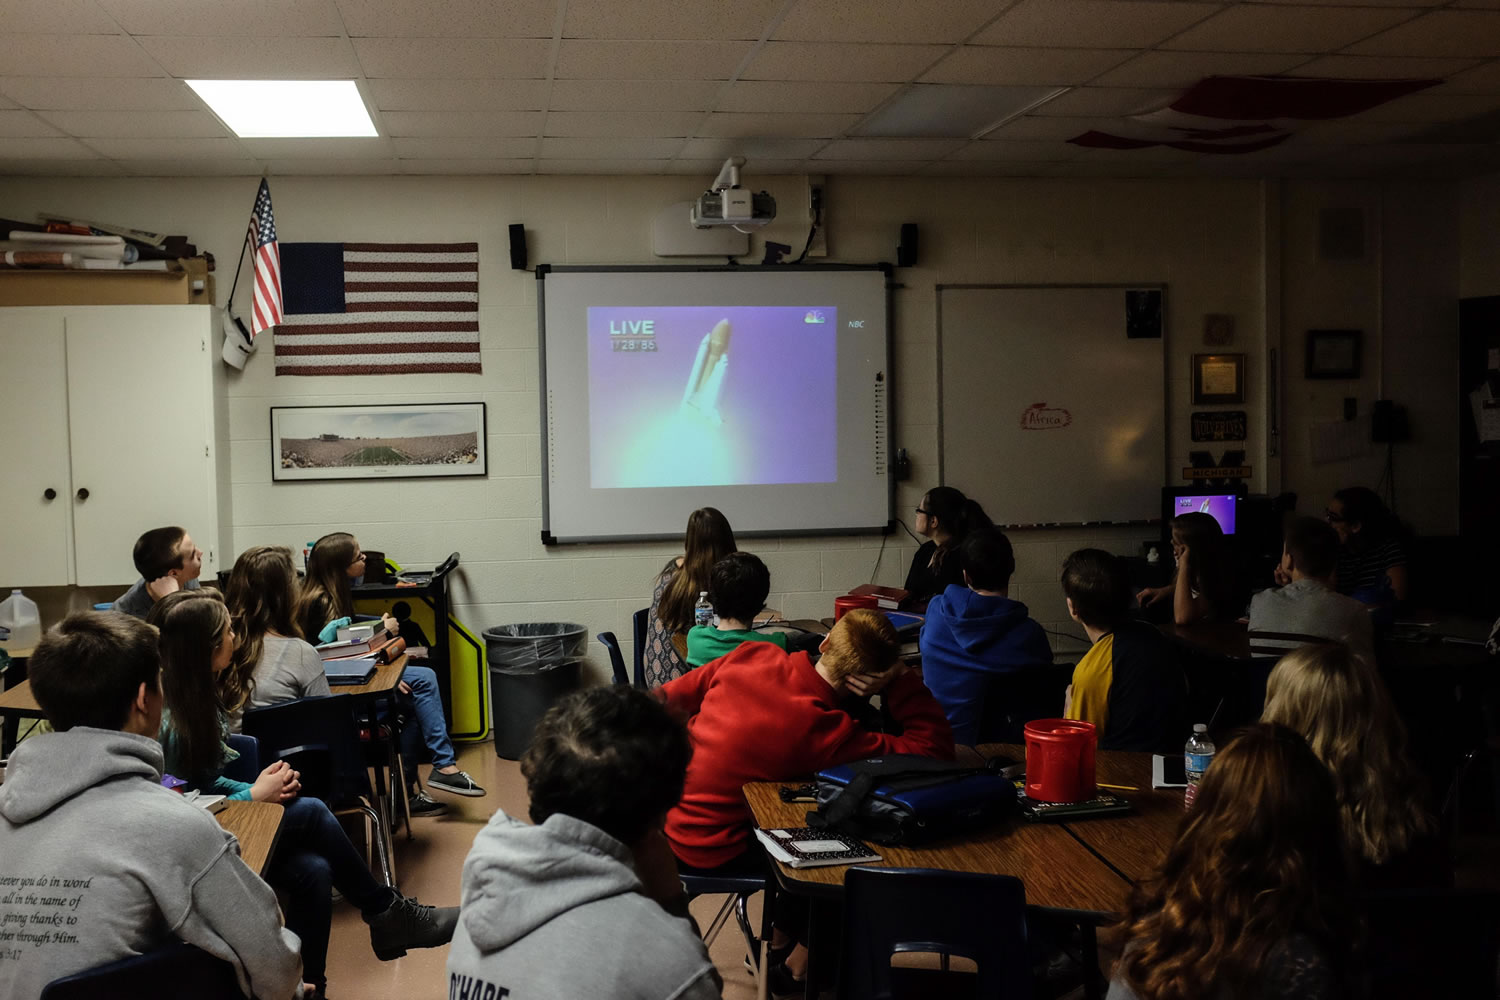 Eighth-grade students in Bangor Township, Mich., watch a video Thursday of the January 1986 Challenger space shuttle launch. The students were learning about teacher-astronaut Christa McAuliffe, whom their middle school is named after, on the space shuttle accident's 30th anniversary.